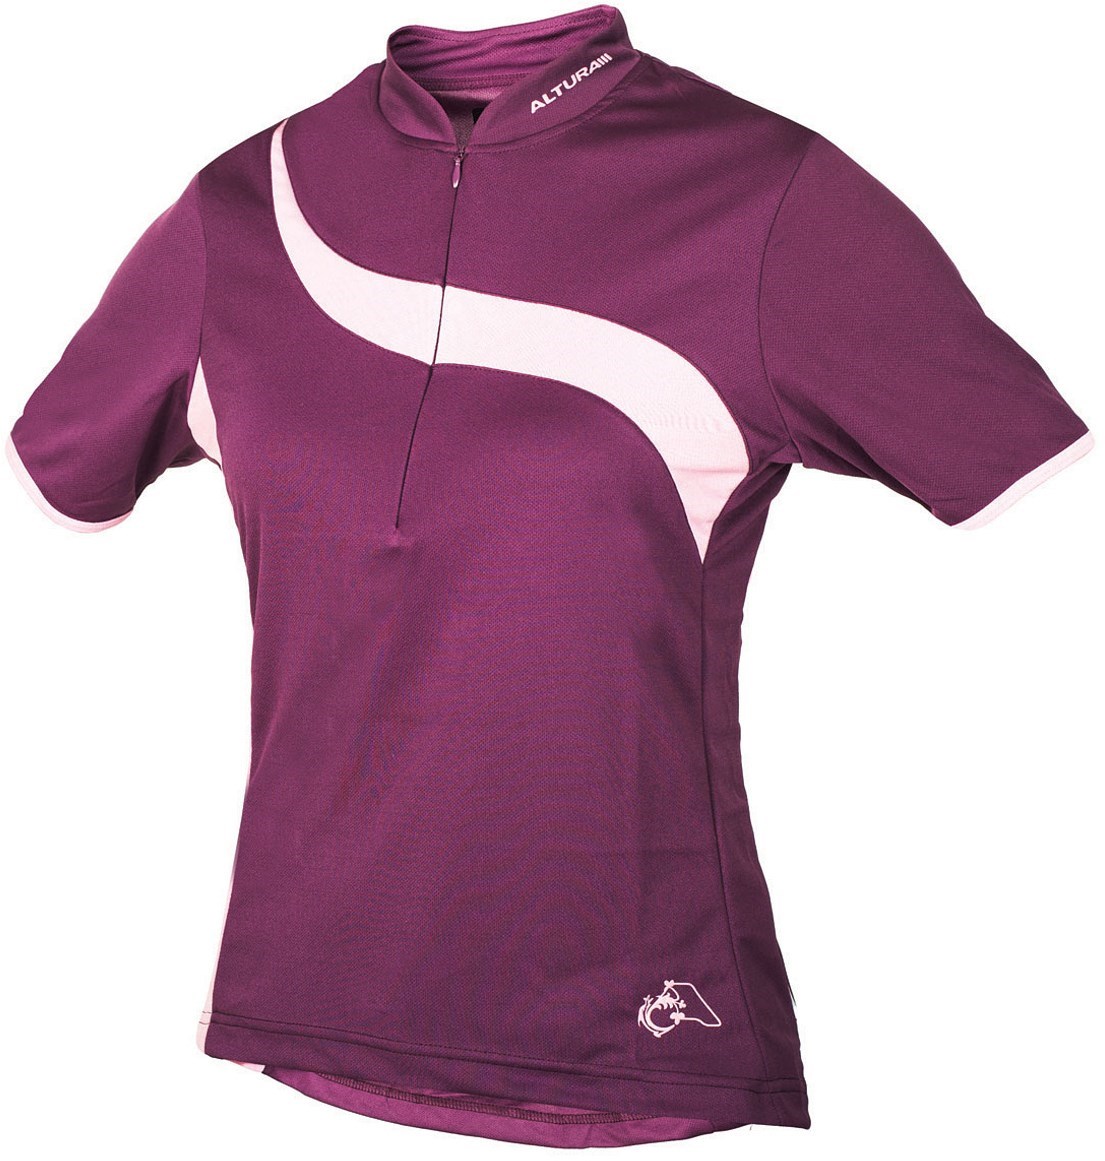 Altura Spirit Short Sleeve Womens Cycling Jersey 2013 product image